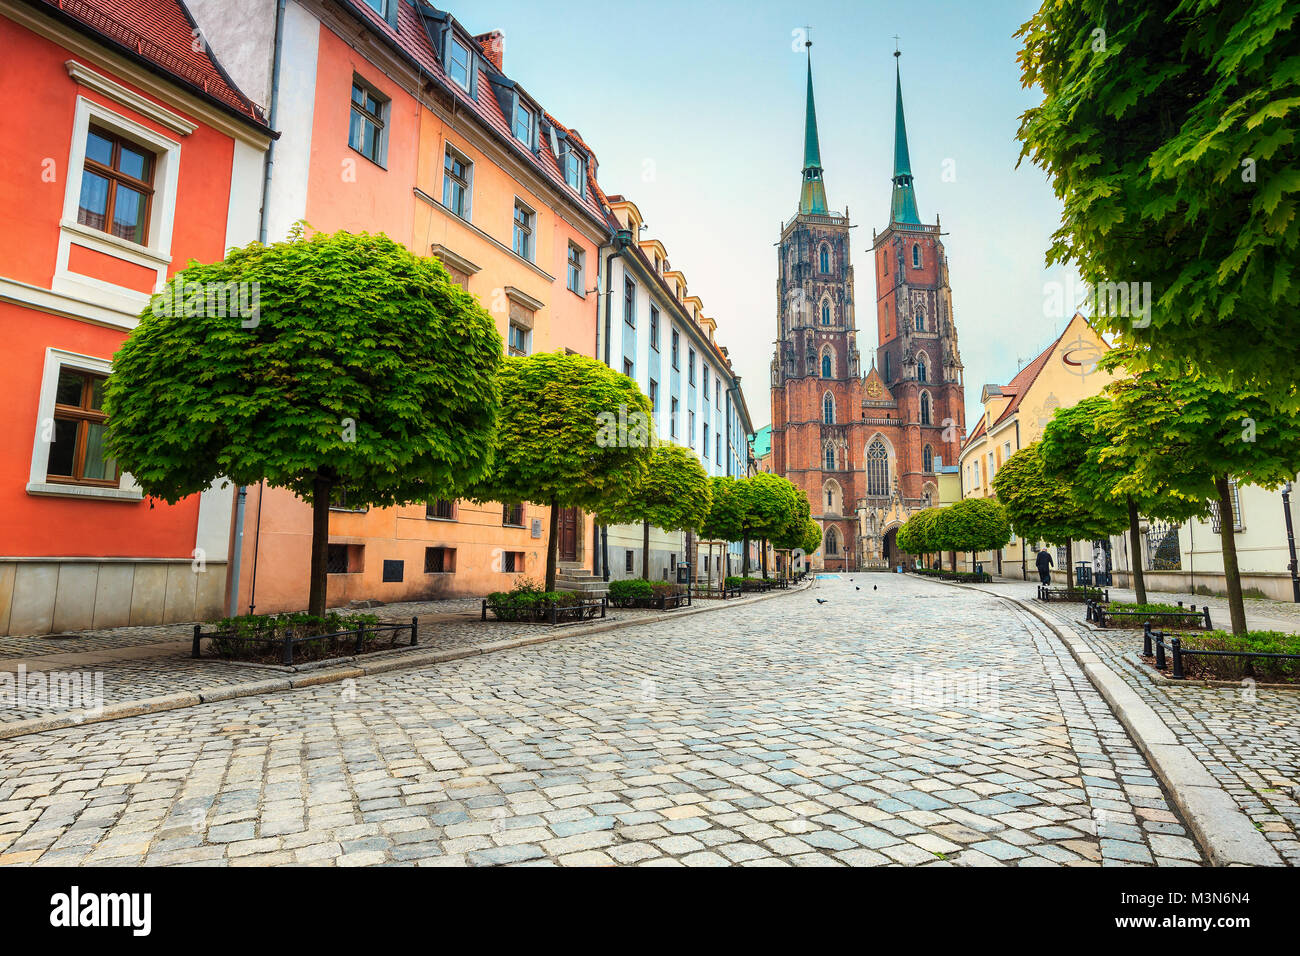 Fantastic spring street panorama with old buildings, paved road and spectacular St John cathedral, Wroclaw, Silesian Lowland region, Poland, Europe Stock Photo